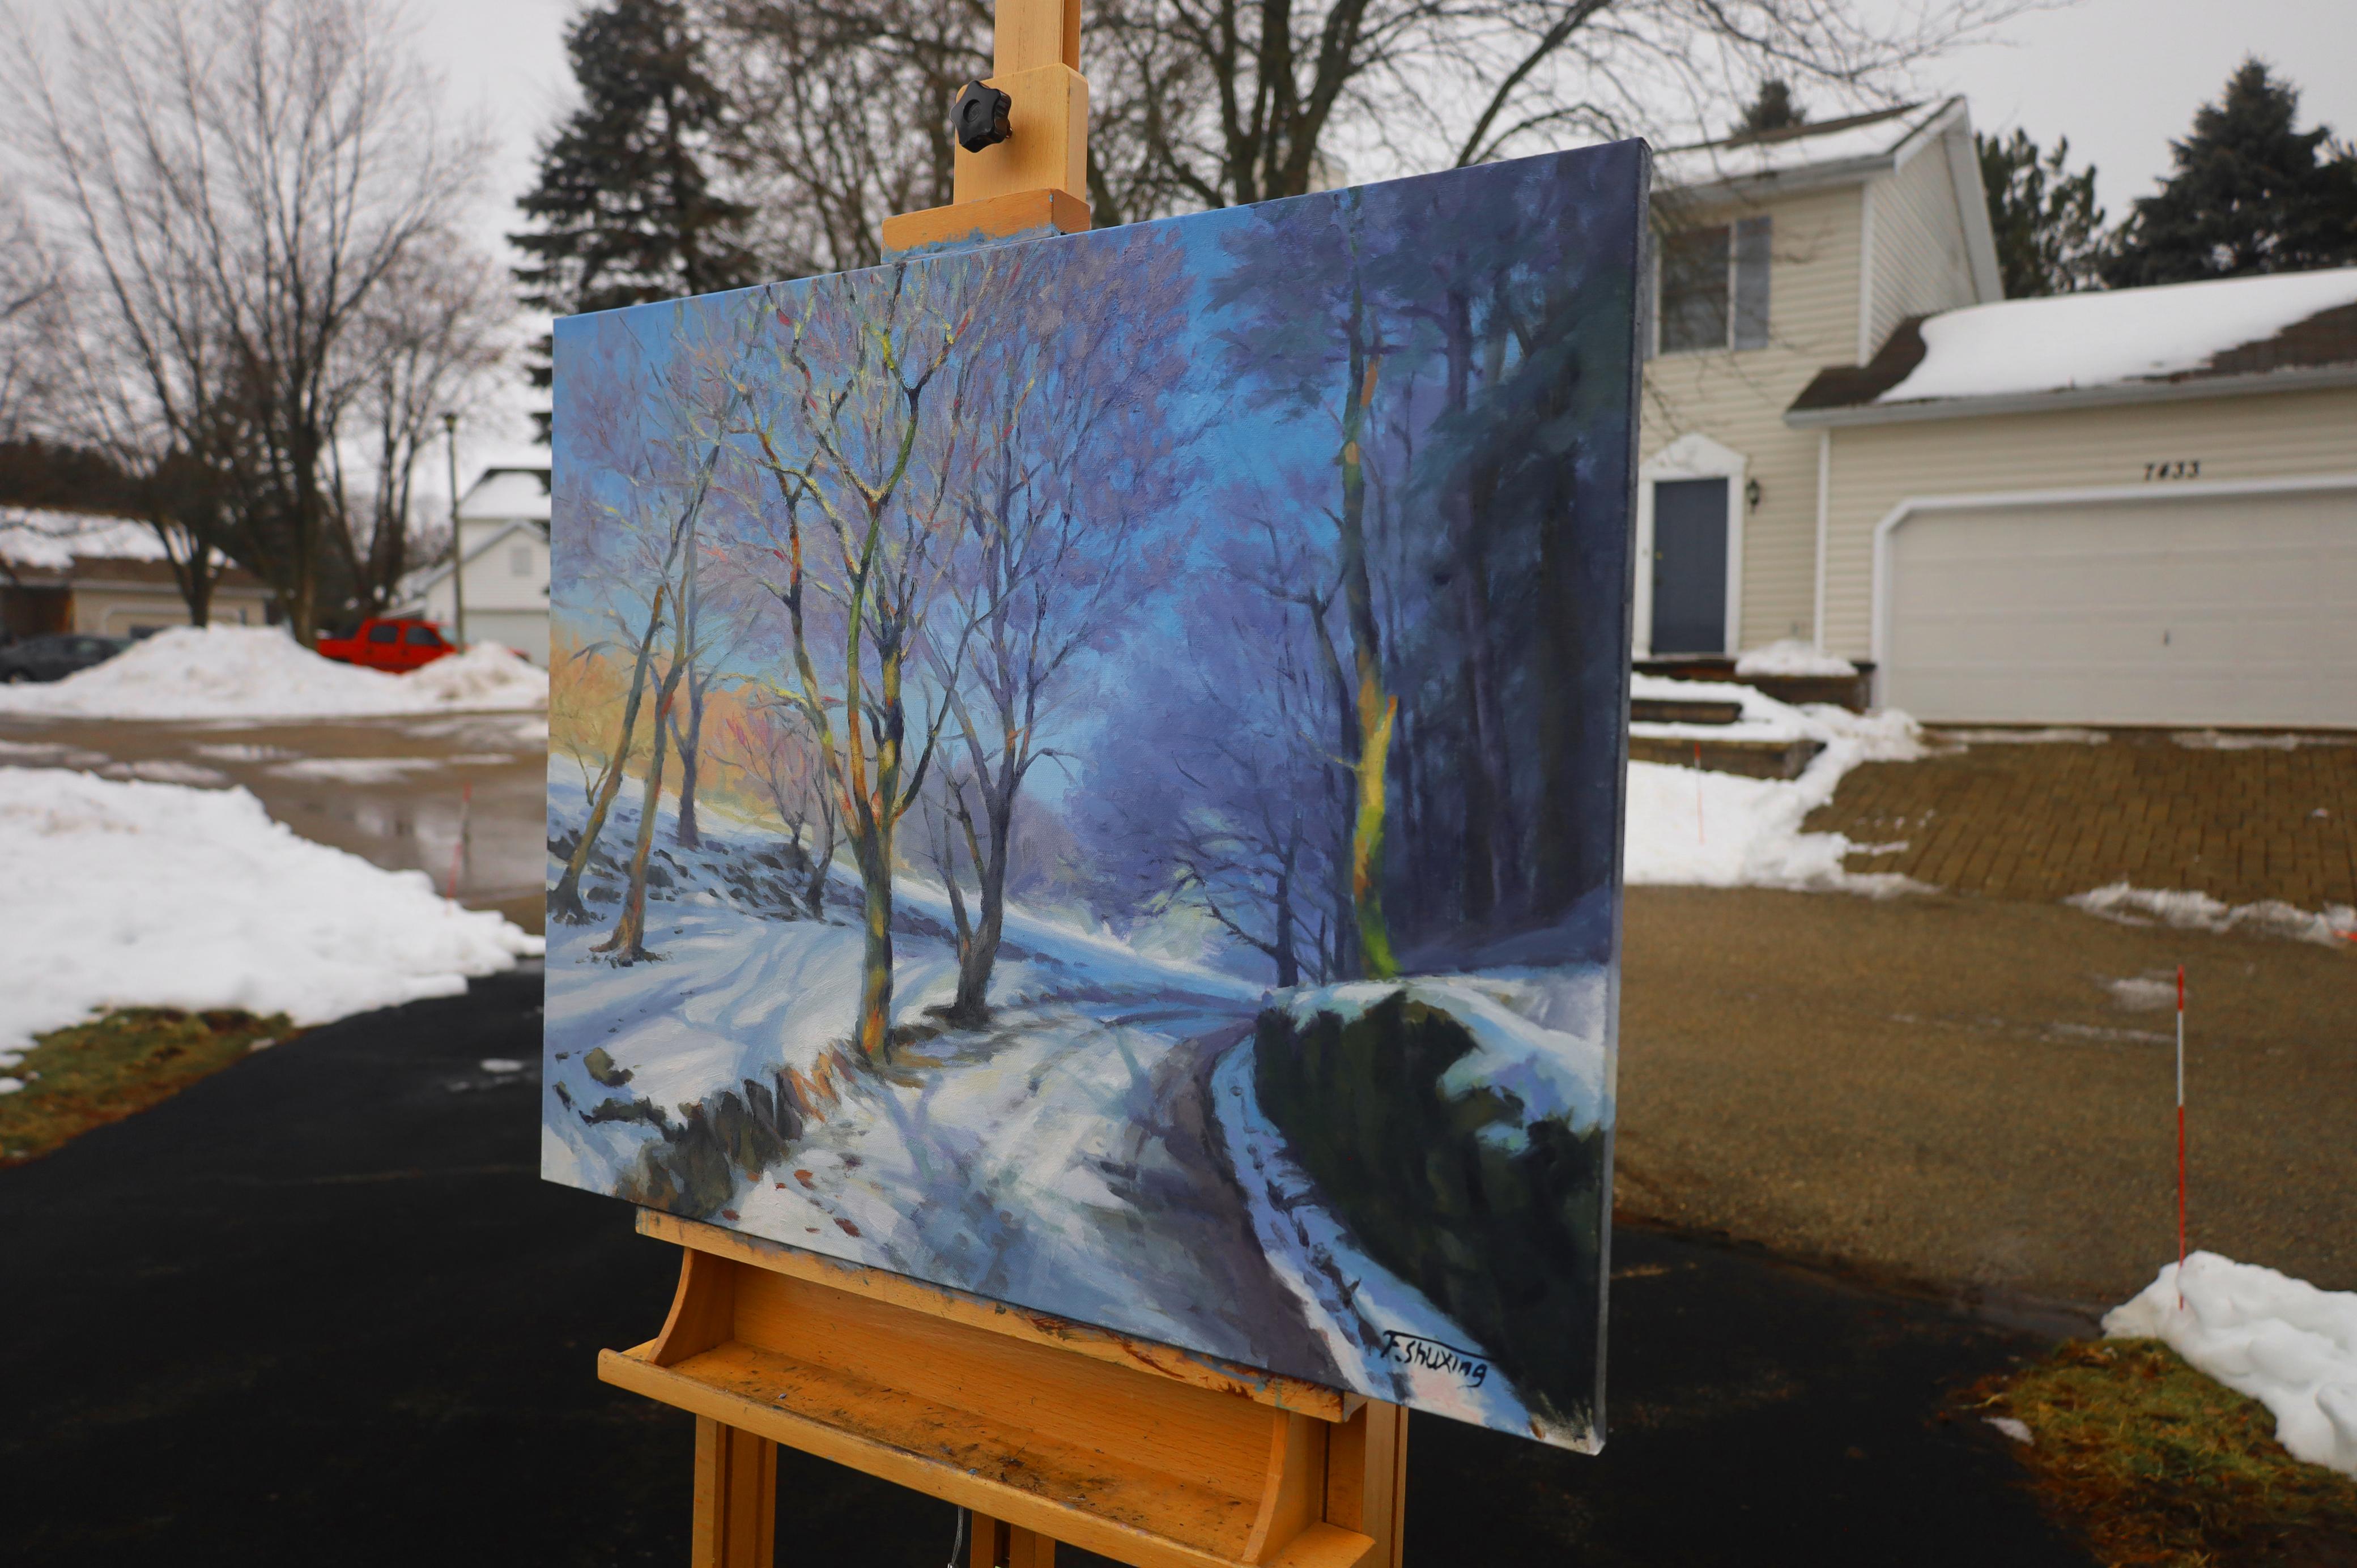 <p>Artist Comments<br>A road remains visible beneath a blanket of snow. Bordering trees, some concealed in the shade while others bask in the warmth of the sun, reveal colors and shapes that add contrast to the white surroundings. This winter scene